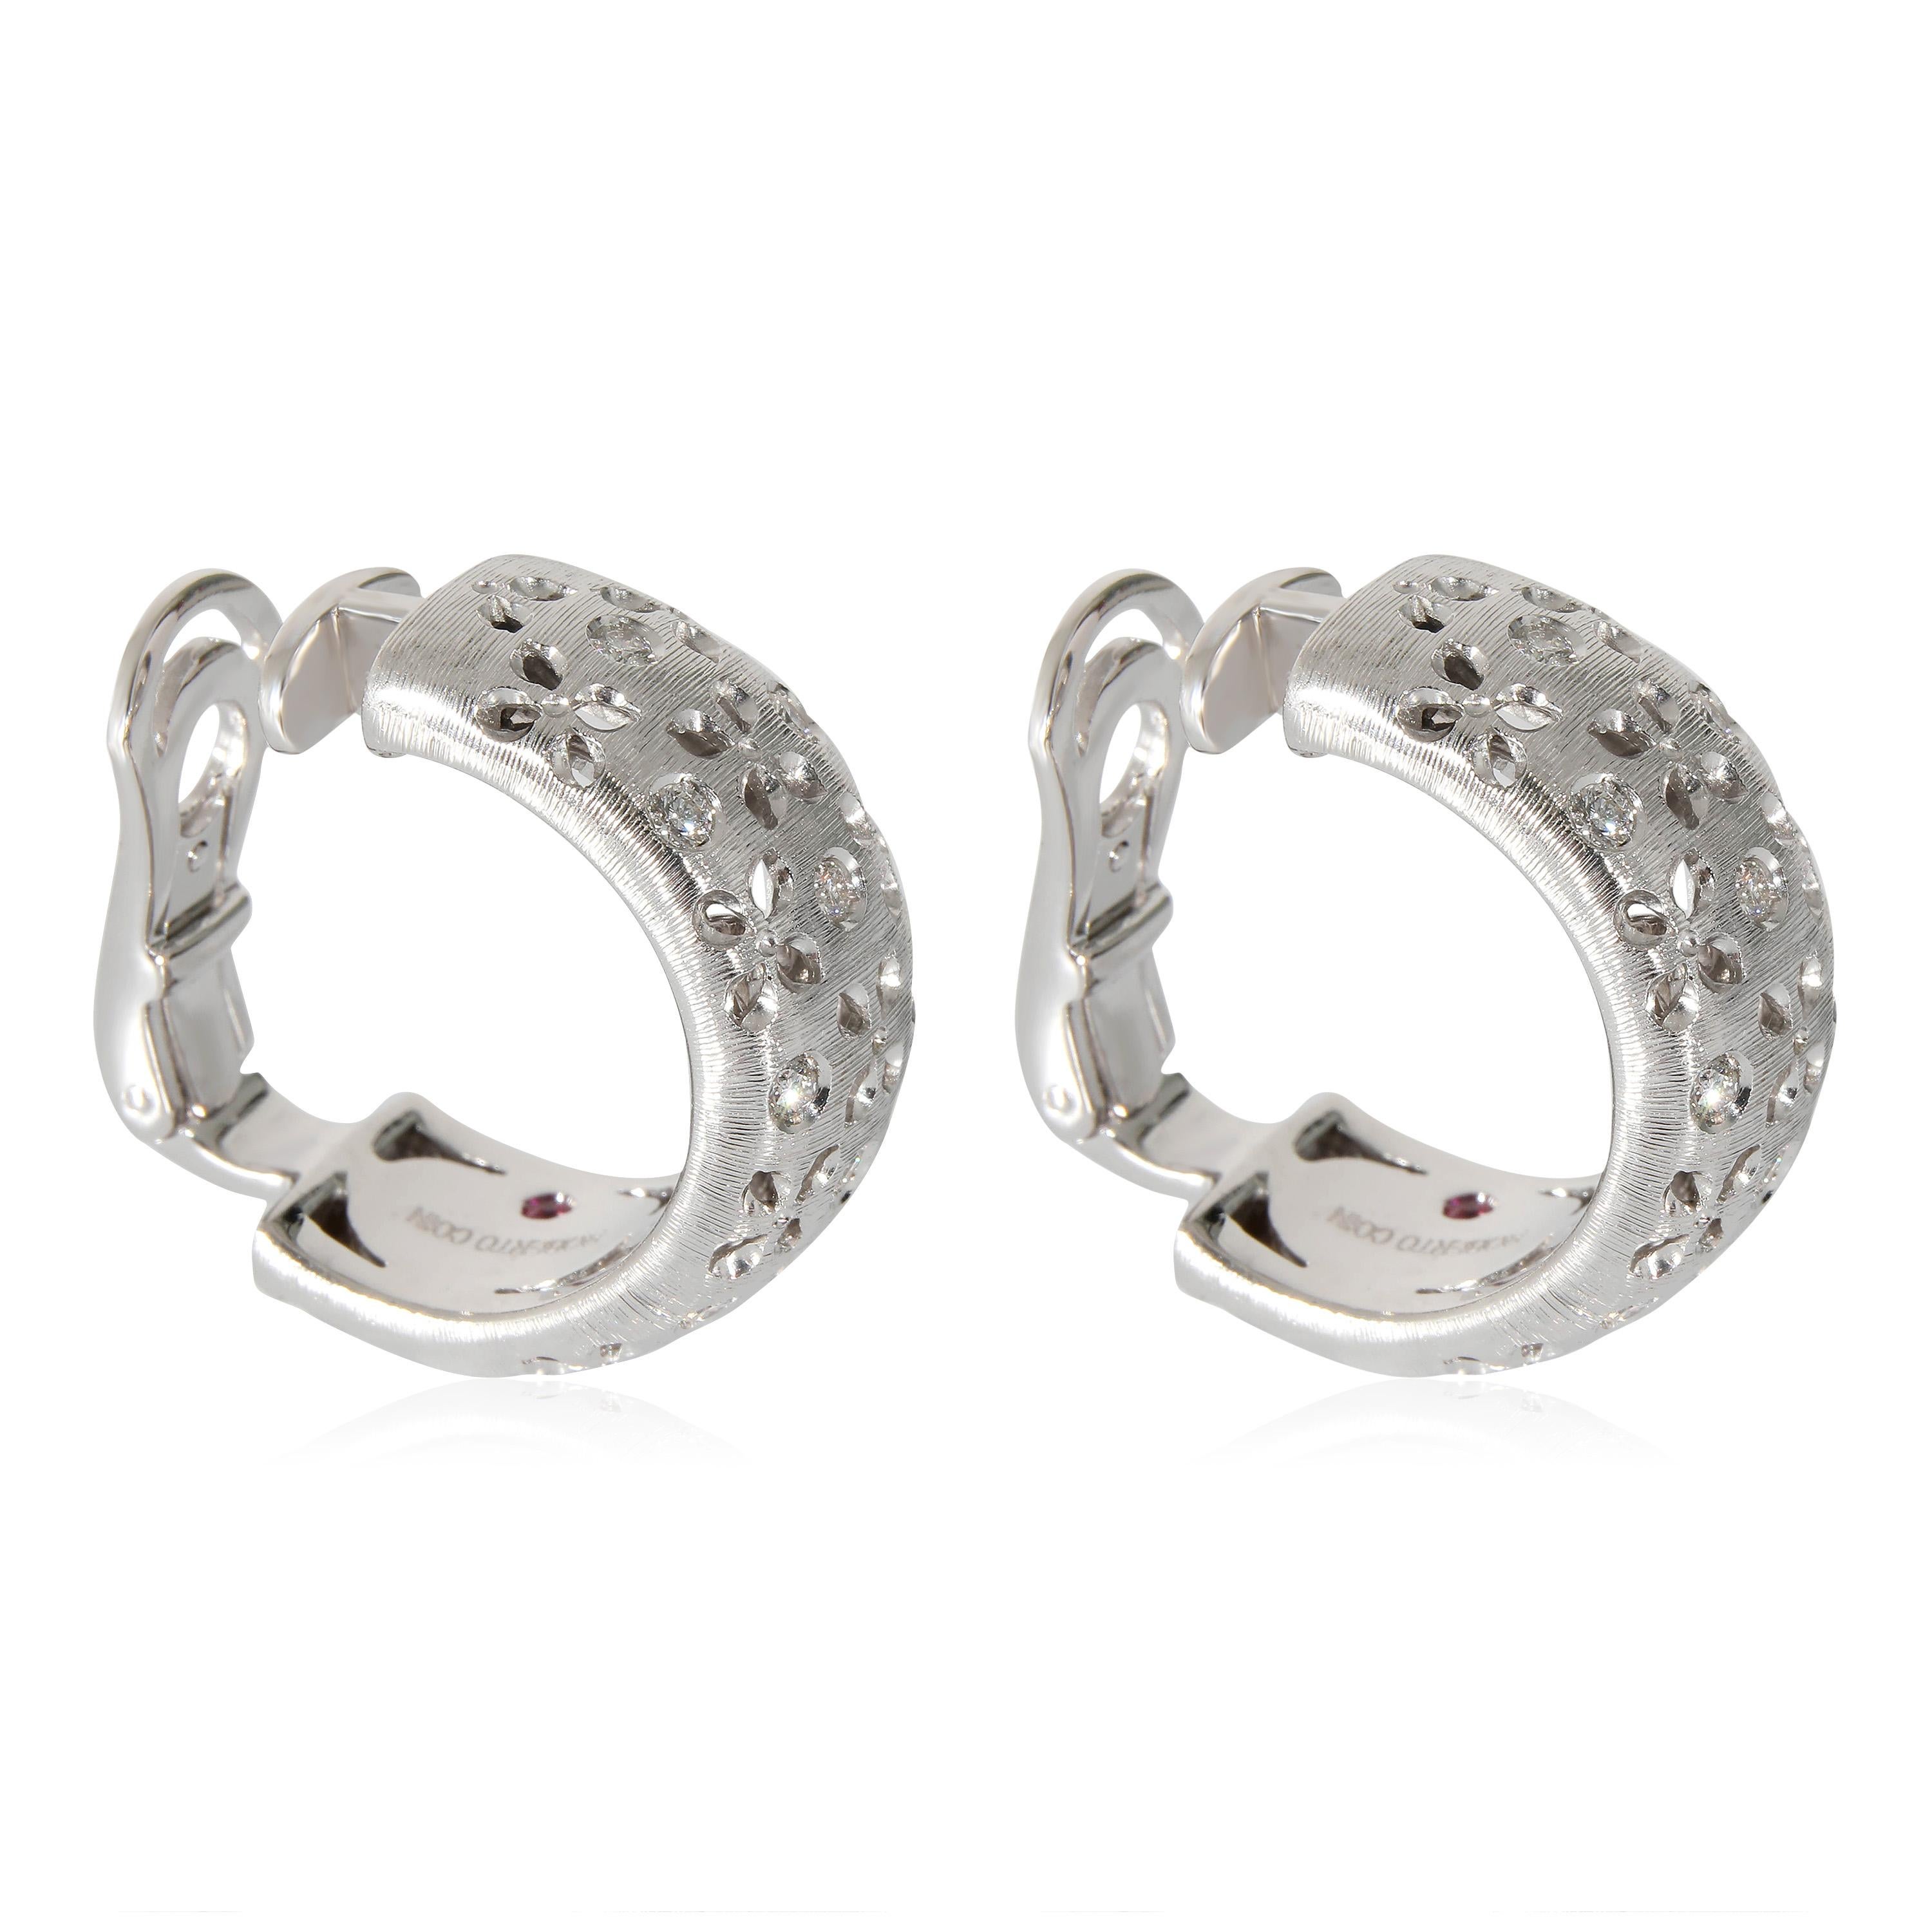 Roberto Coin Granada Clip On Hoop Earrings in 18k White Gold 0.40 CTW In Excellent Condition For Sale In New York, NY